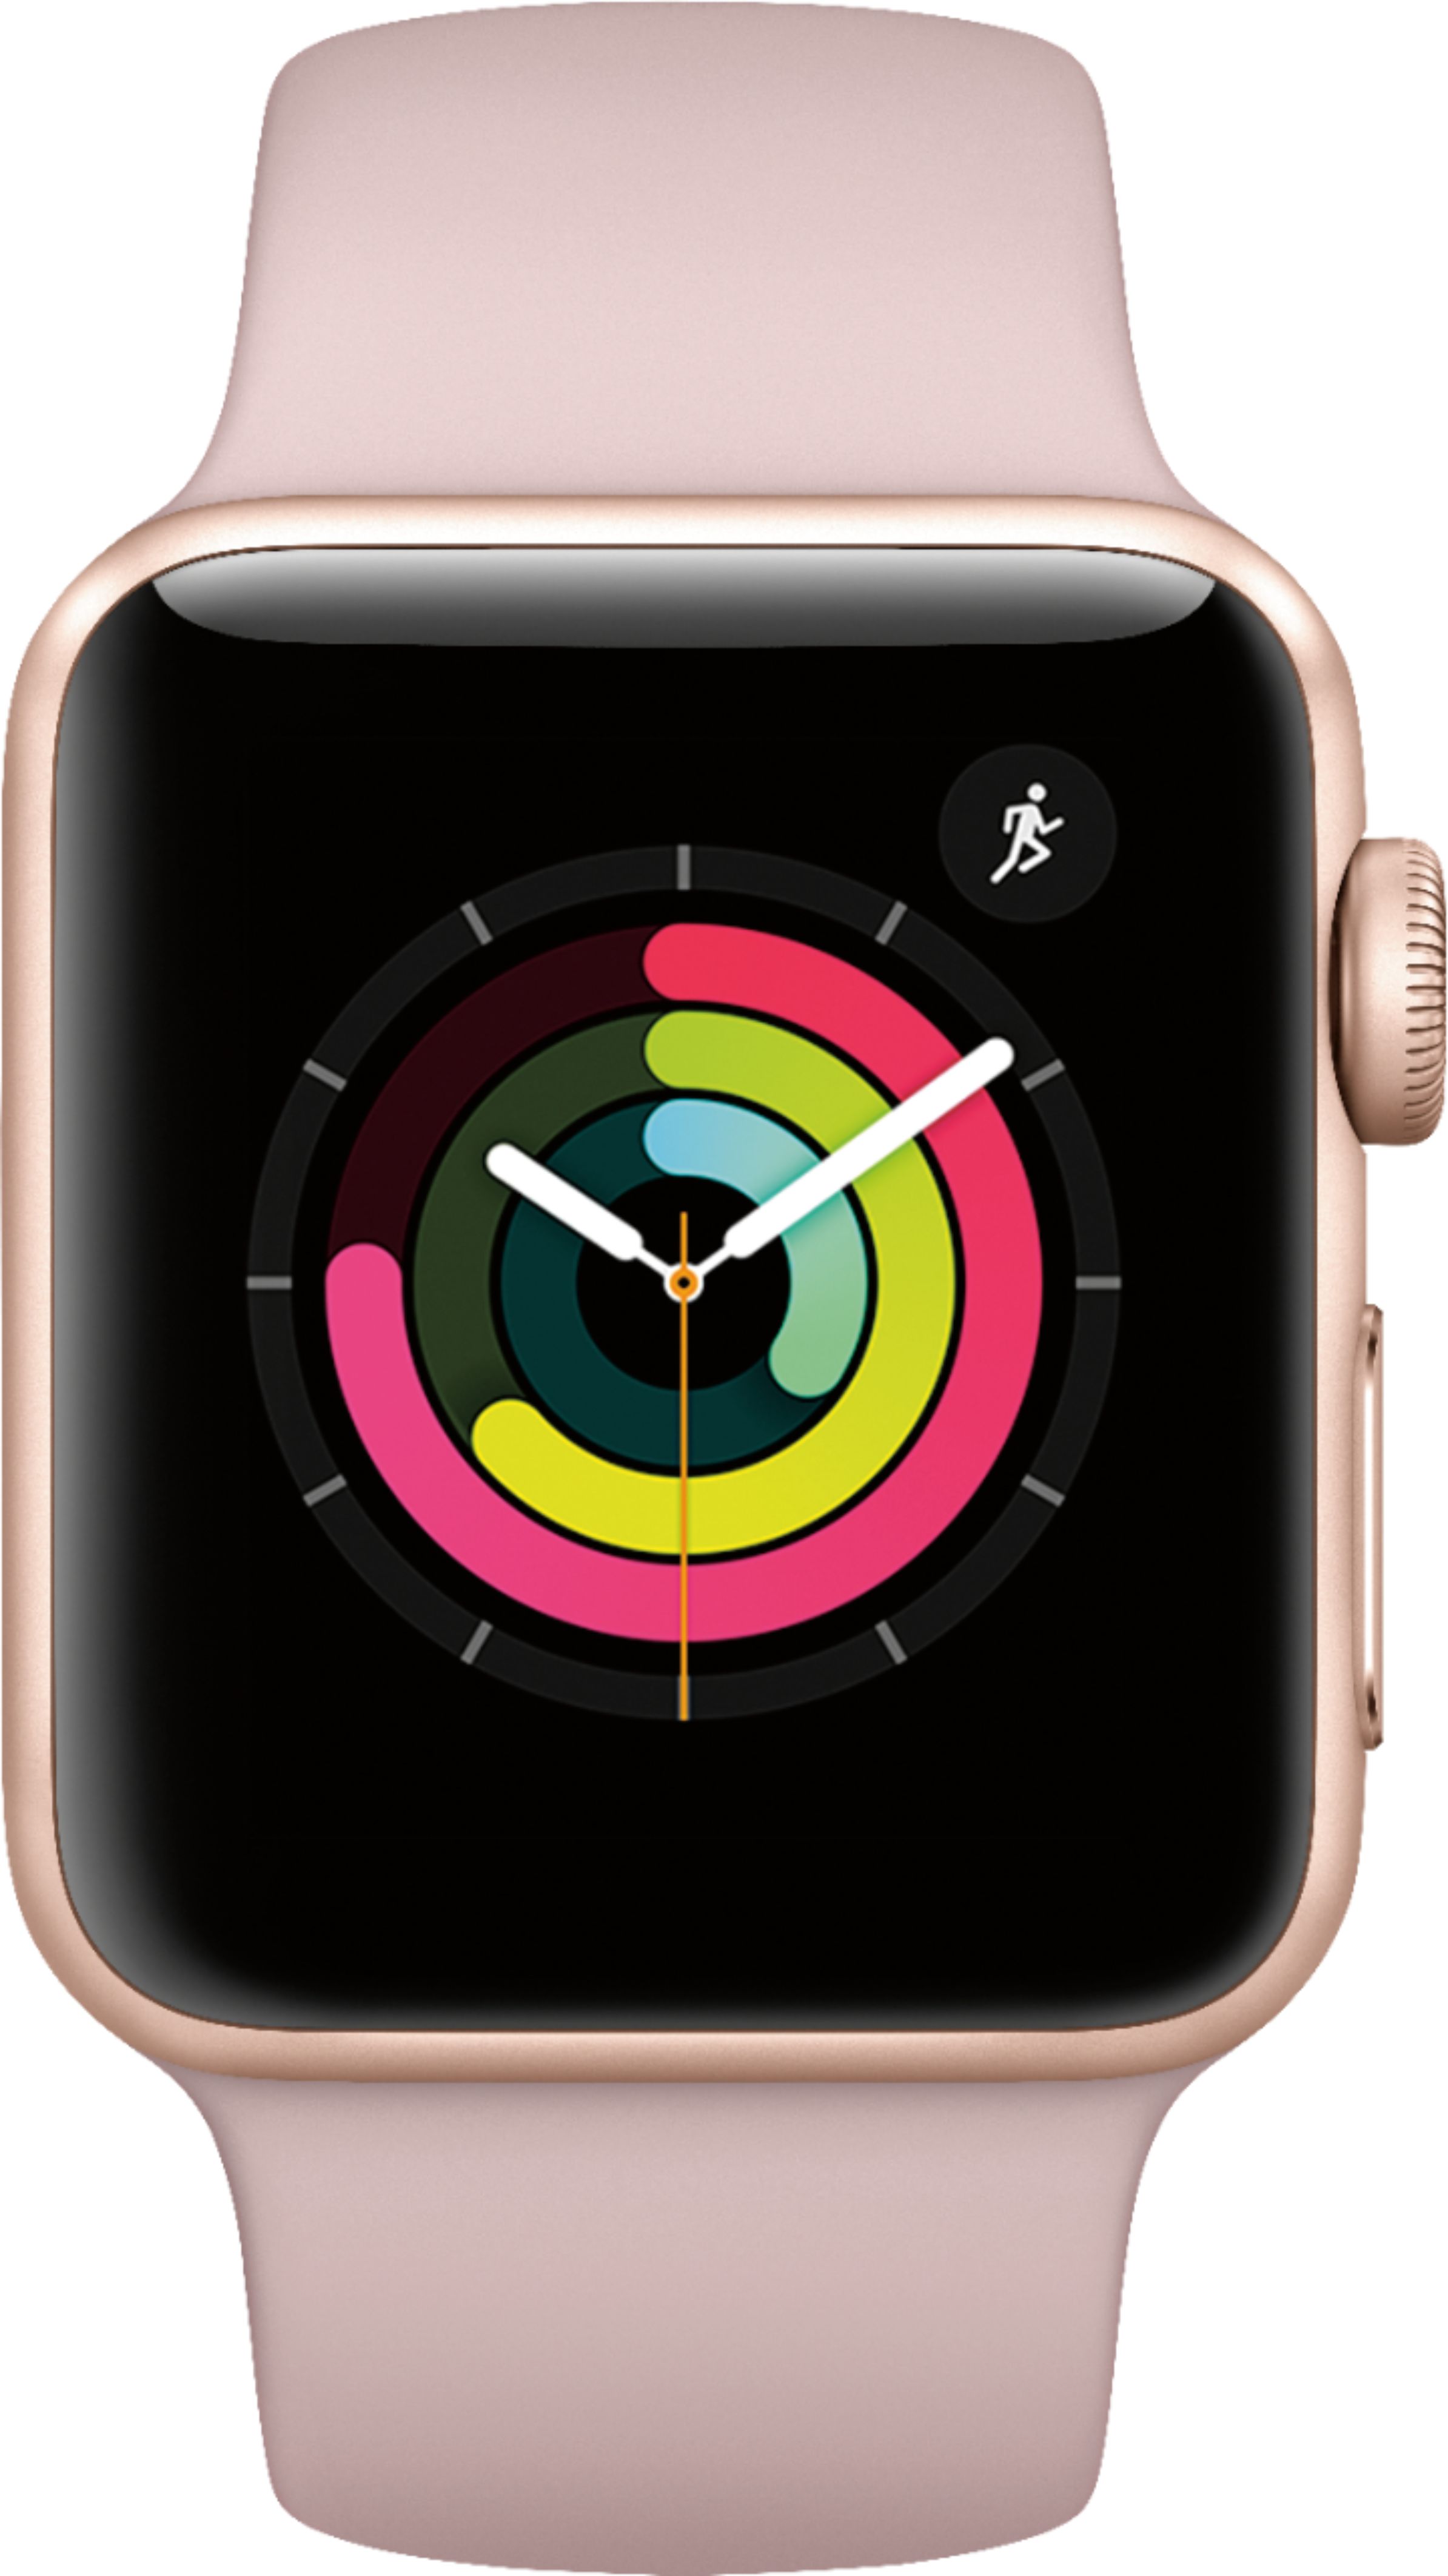 Best Buy: Apple Watch Series 3 (GPS), 38mm Gold Aluminum Case with